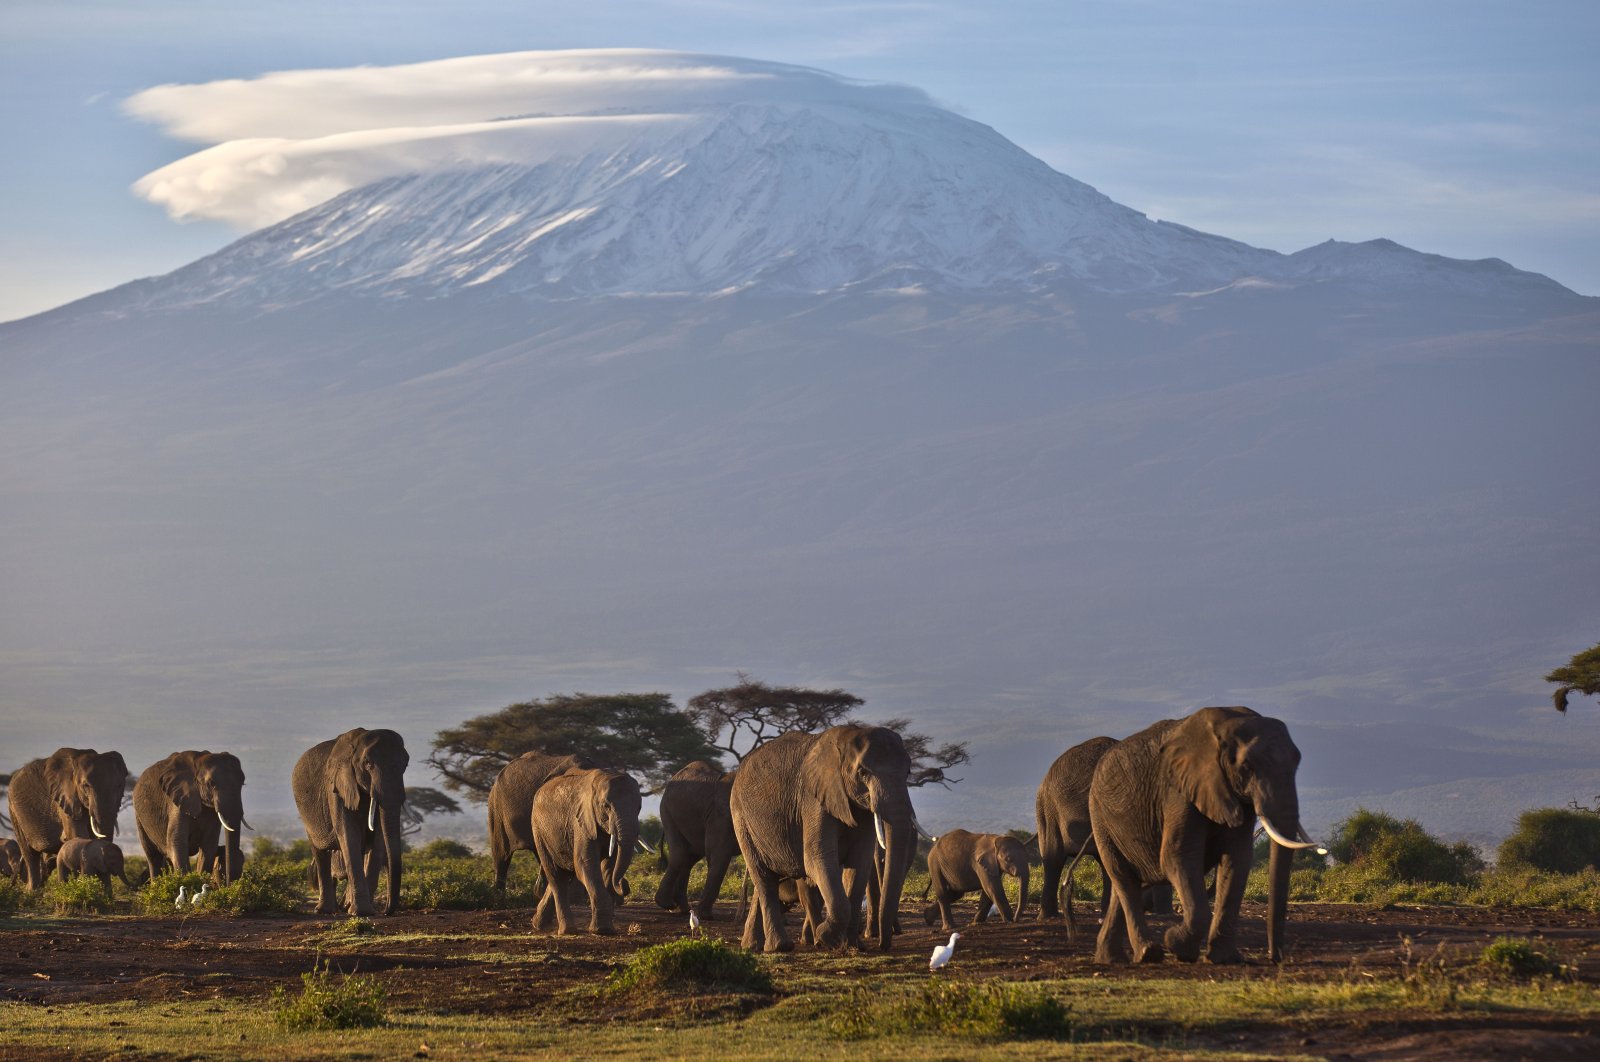 A herd of adult and baby elephants walk in the dawn light as the highest mountain in Africa, Mount Kilimanjaro in Tanzania, sits topped with snow in the background, seen from Amboseli National Park in southern Kenya, Dec. 17, 2012 . (AP file photo)